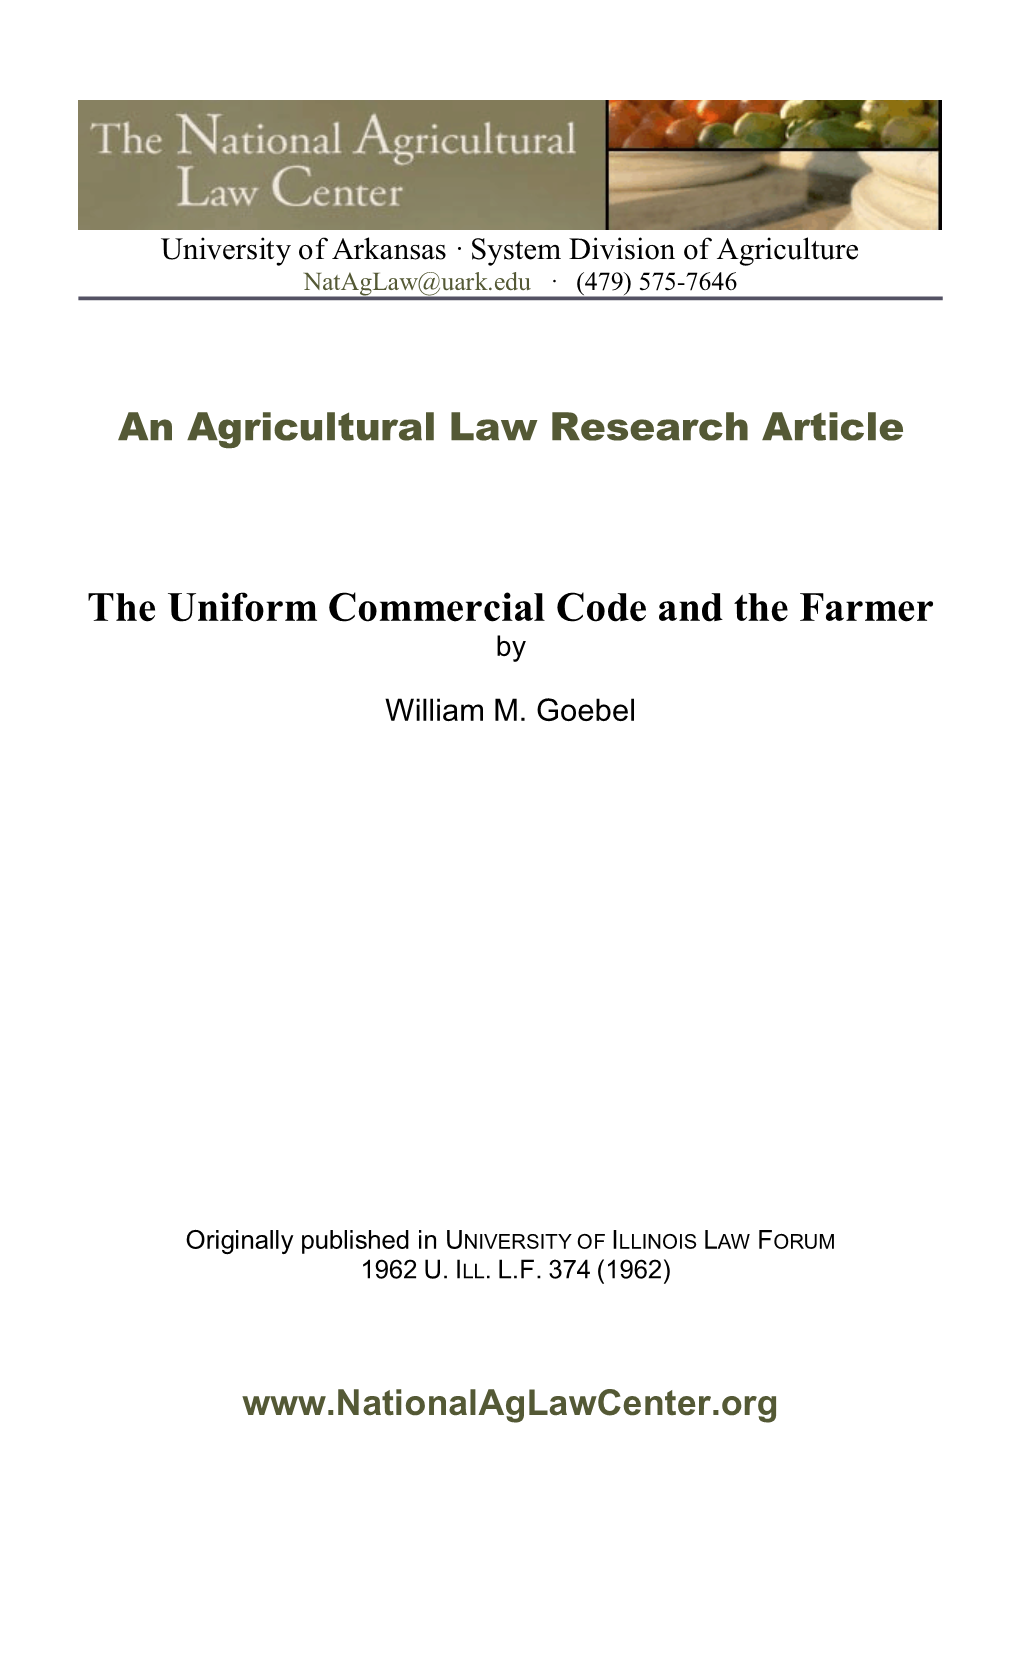 The Uniform Commercial Code and the Farmer By